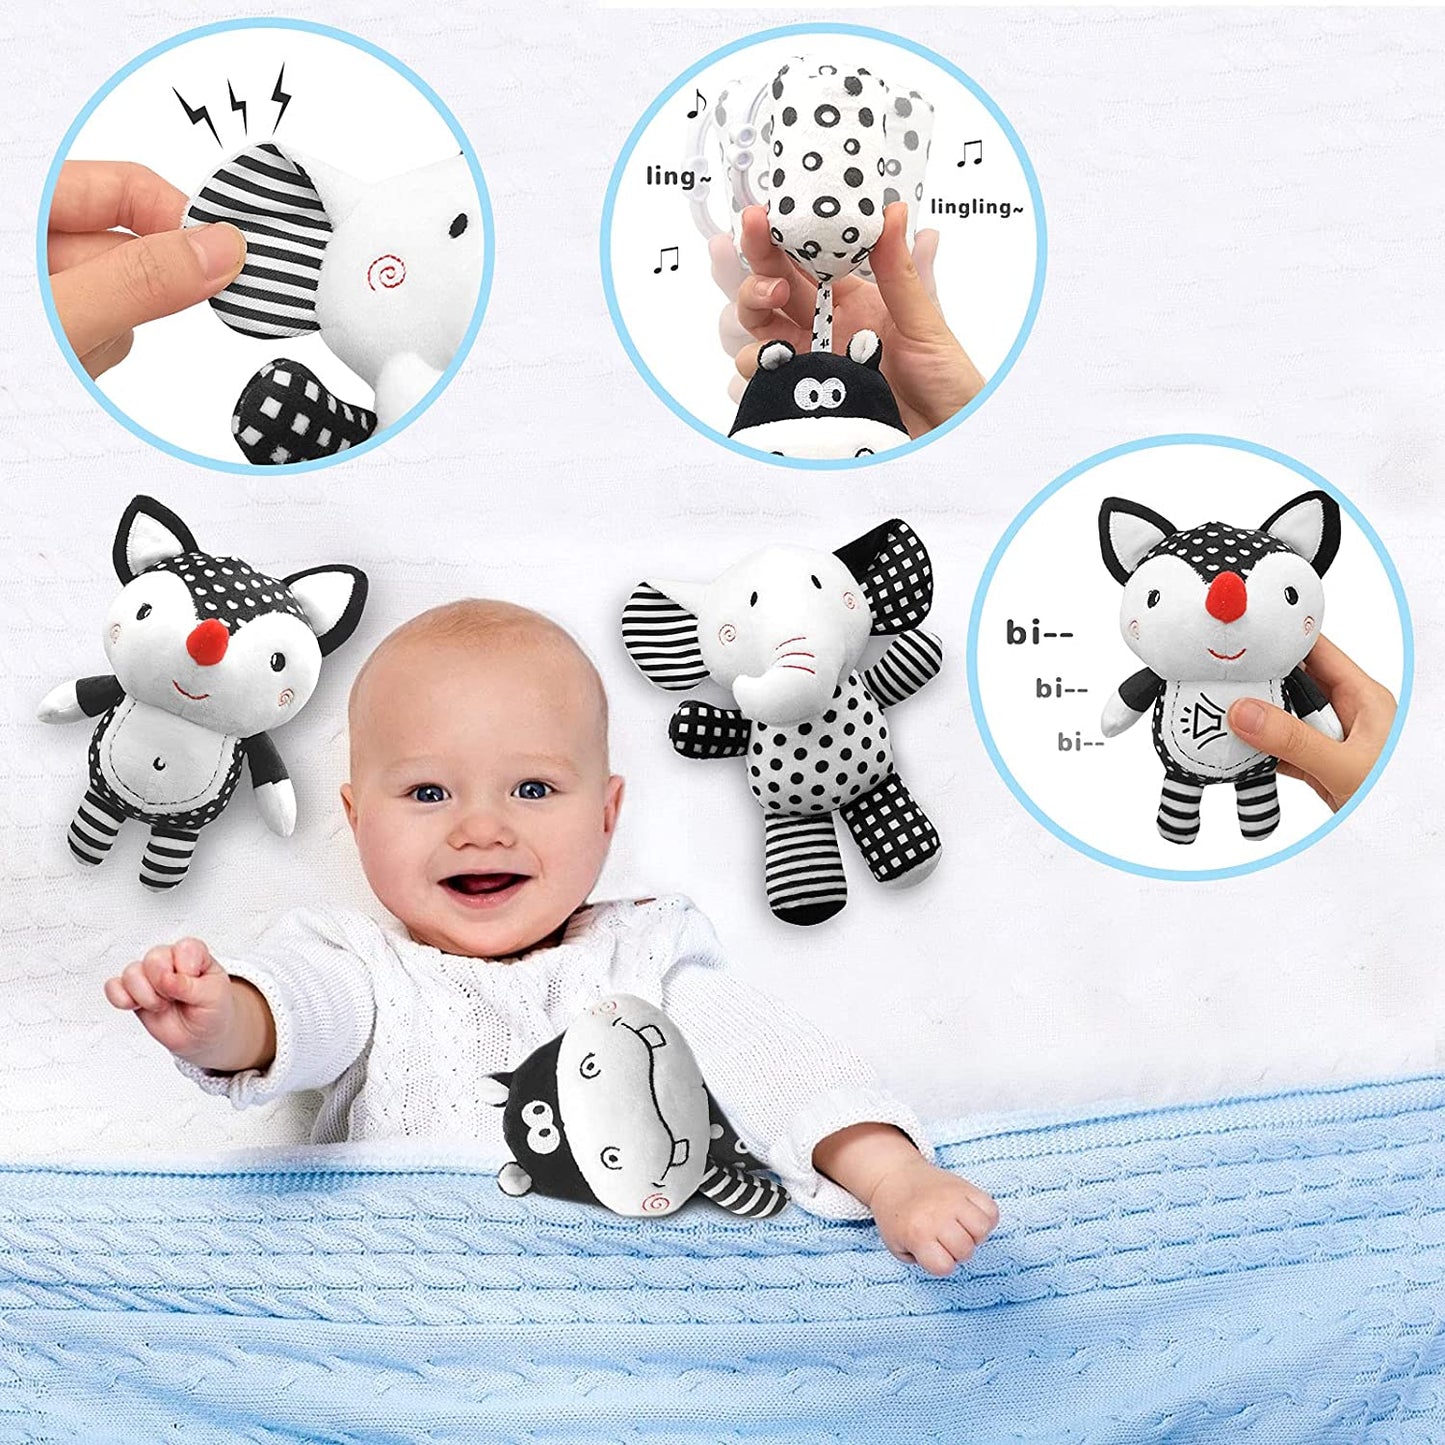 "Musical Hanging Toy Set for Babies - Stimulating Newborns with Soft Plush Rattles, Perfect for Strollers, Cribs, and Car Seats - Ideal Gift for Infants 0-18 Months (3 Pack)"